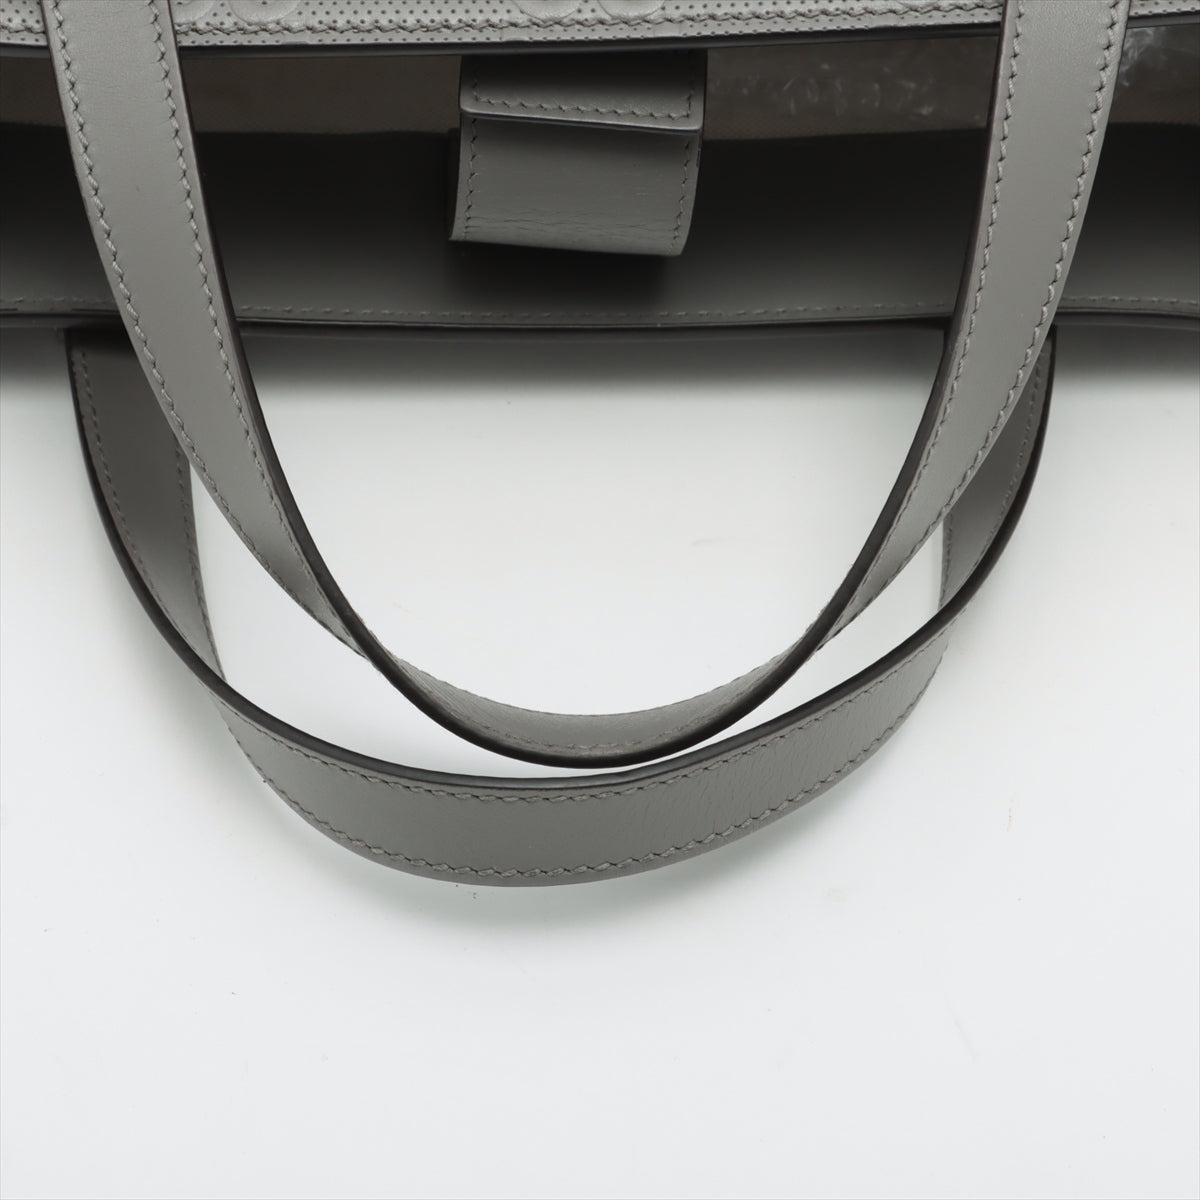 Gucci GG embossed Leather Tote Bag Grey 700421